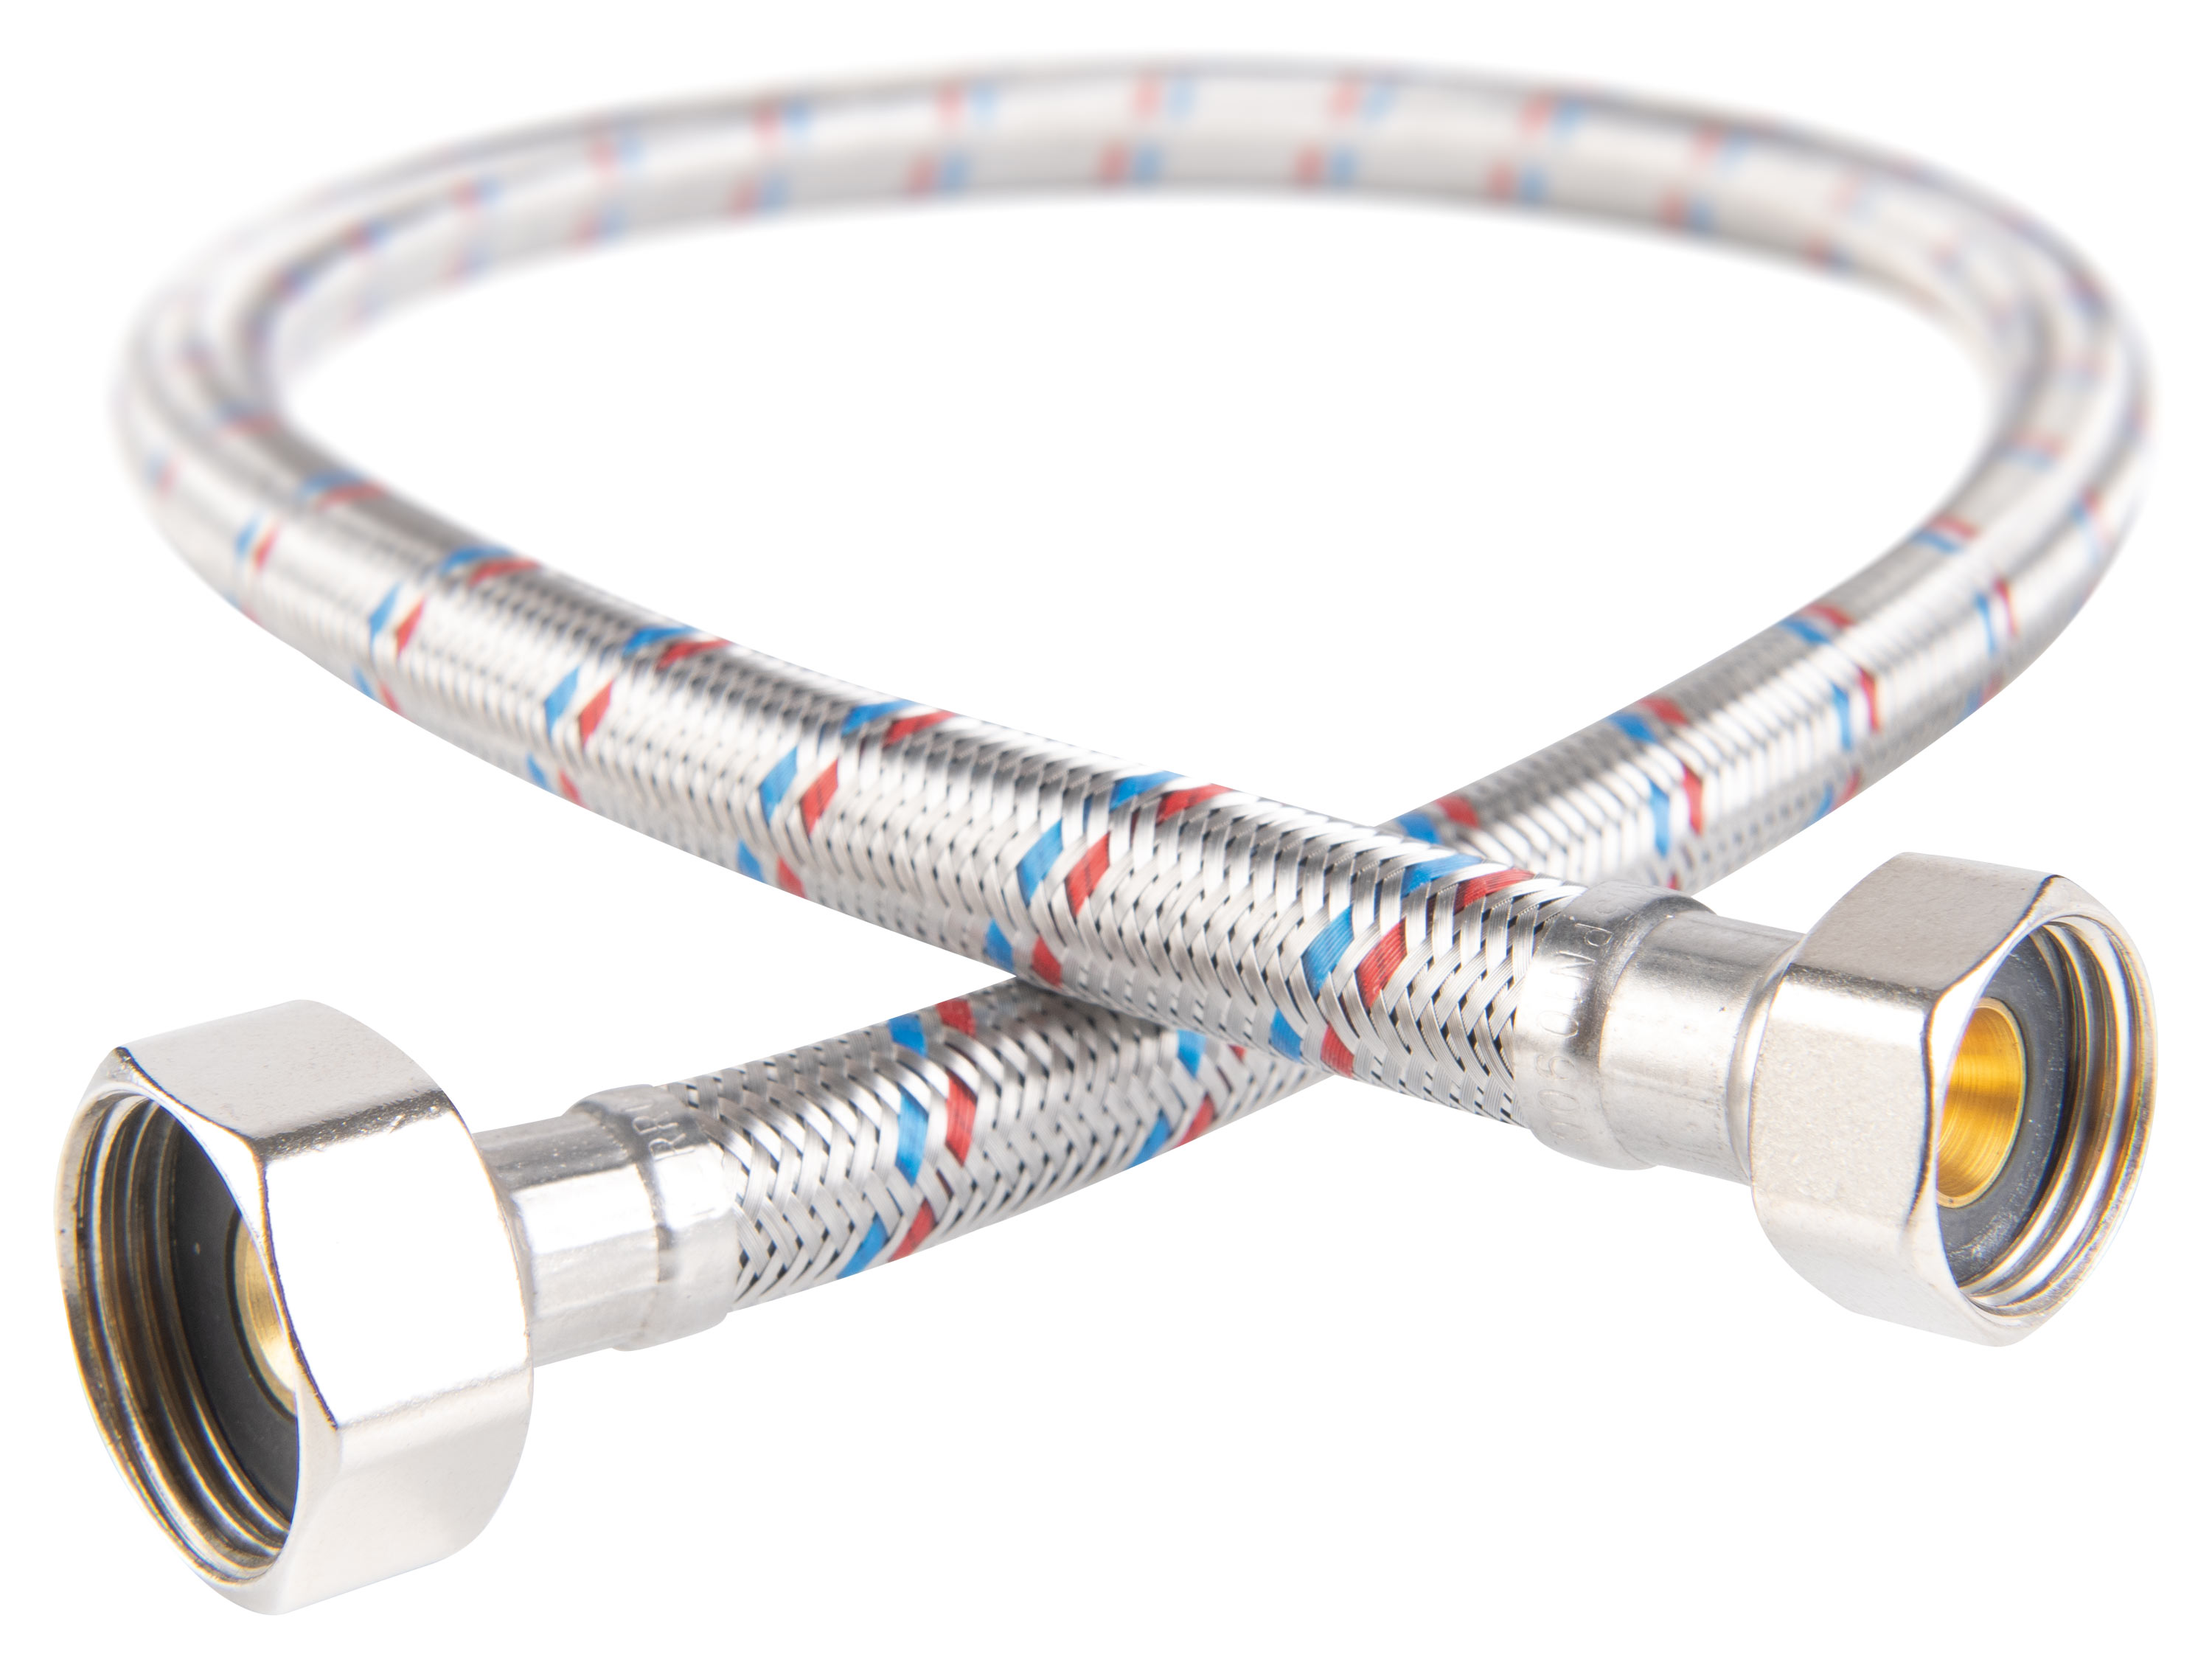 Stainless steel braided connection hose 3/4”x 1/2”, female - female